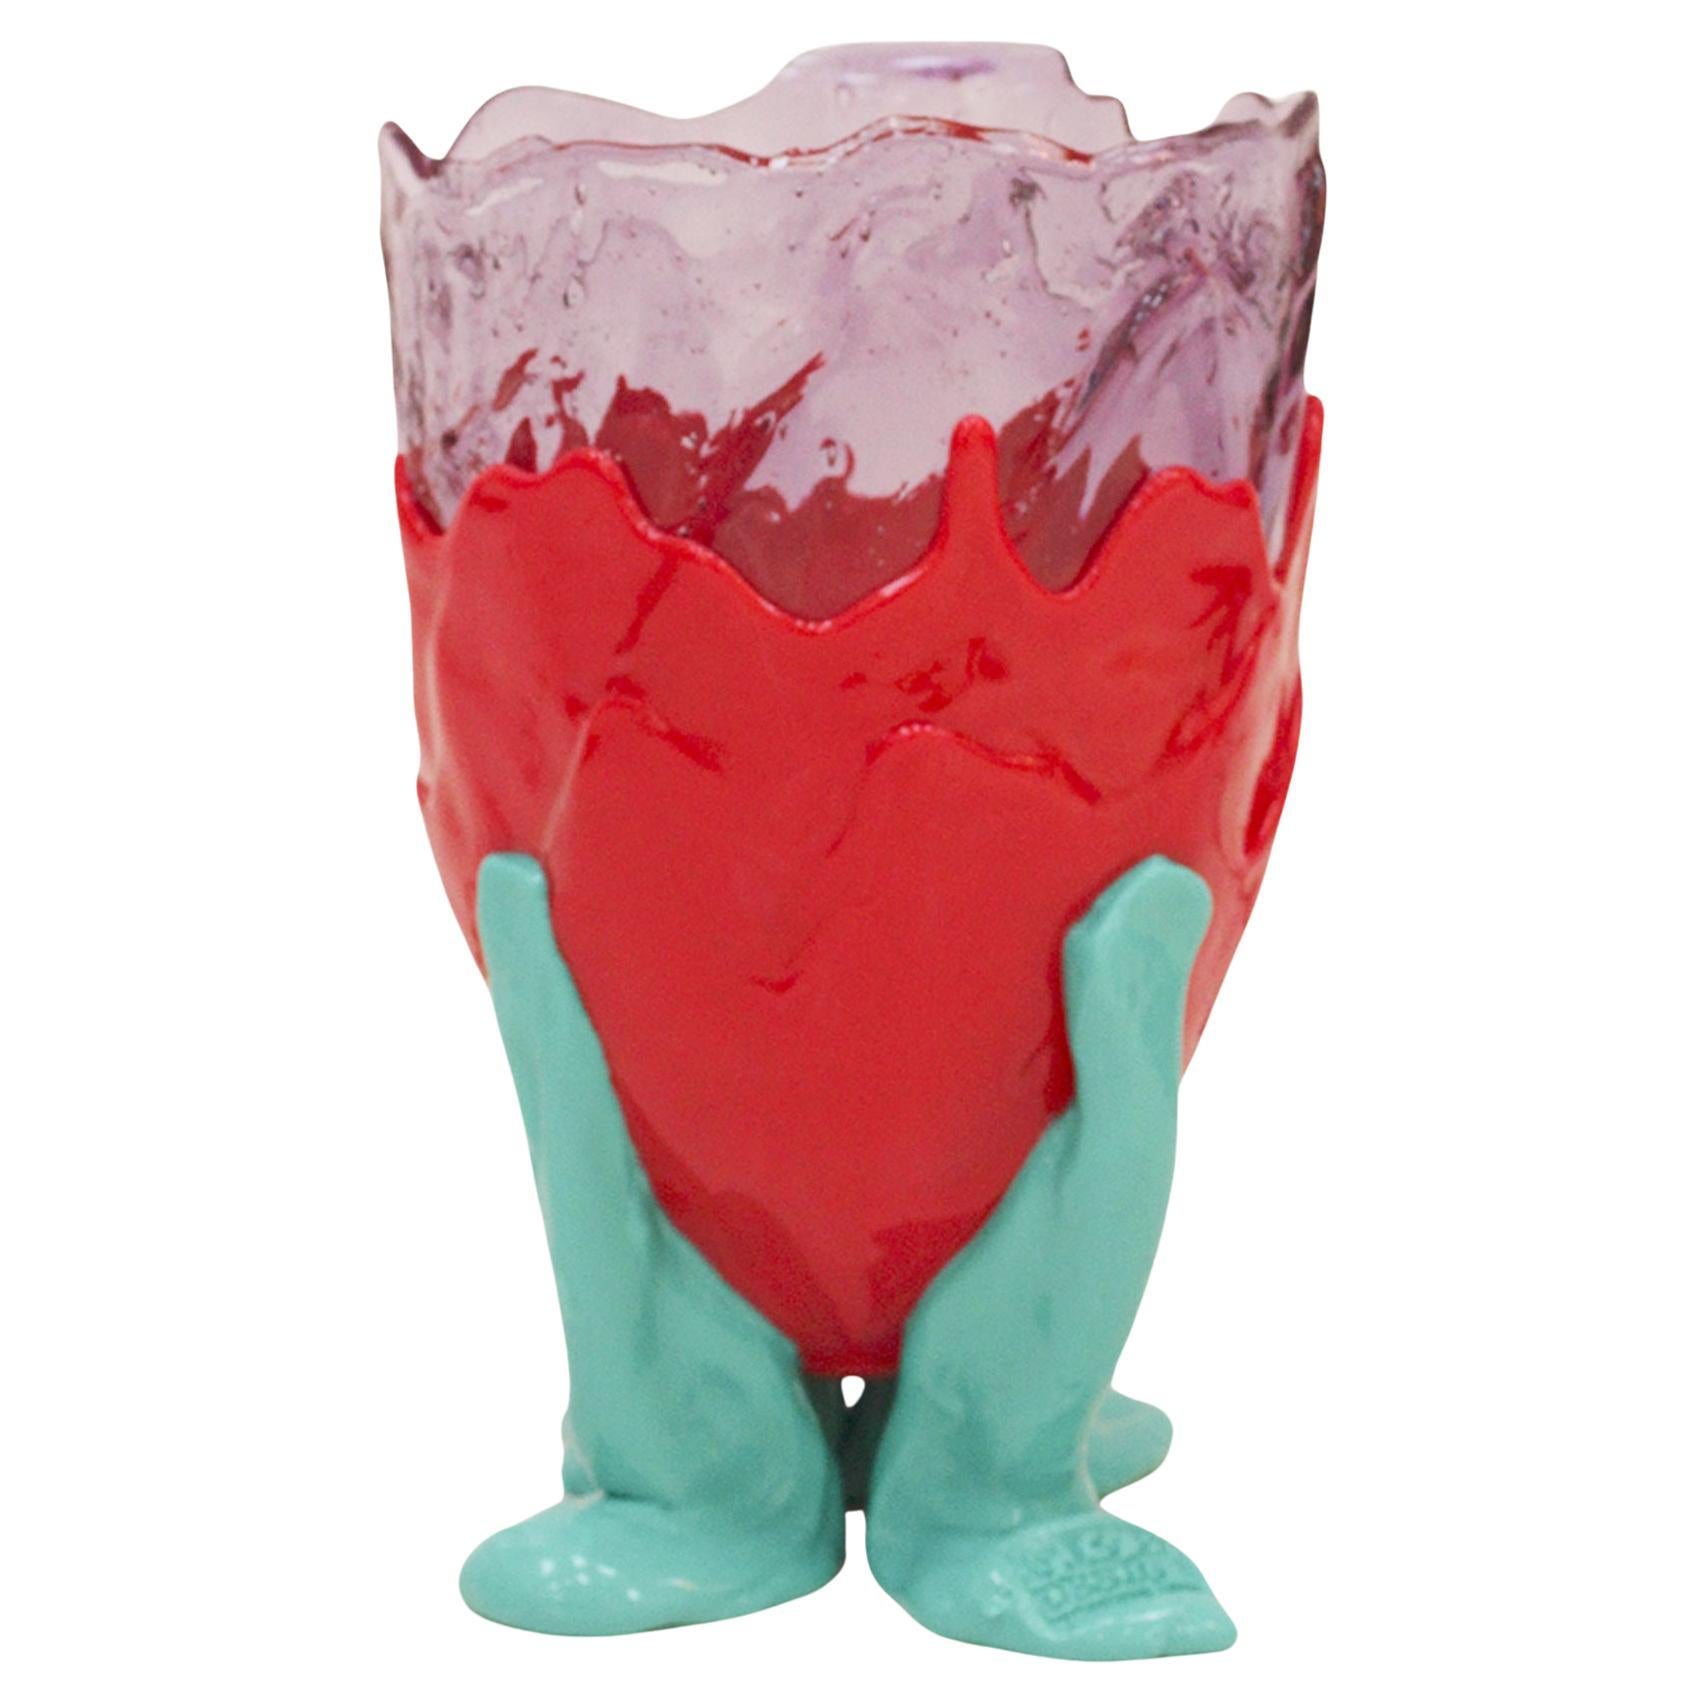 Italian Arty Vase Designed By Gaetano Pesce and Made of Colored Resin For Sale